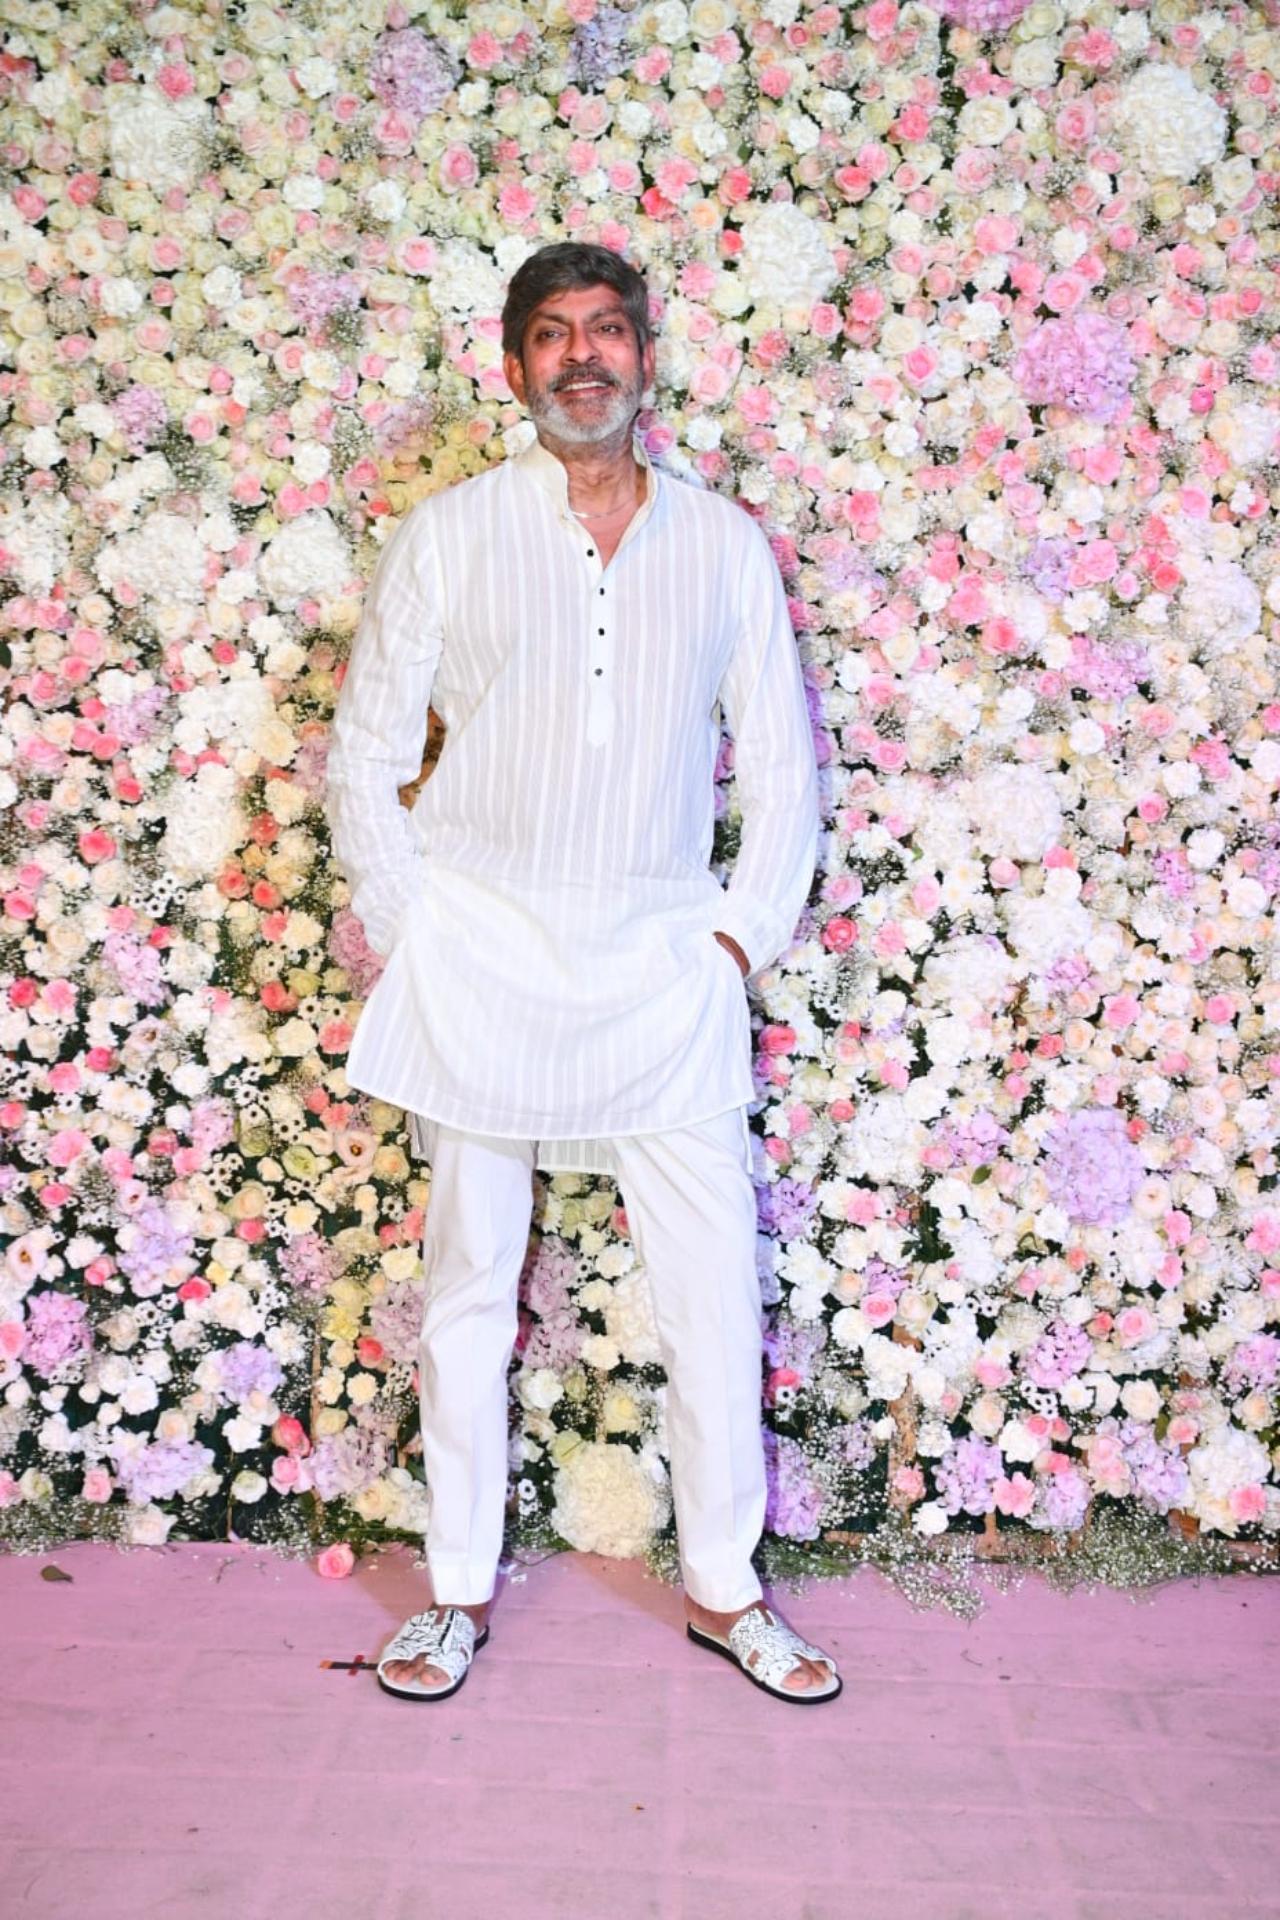 Actor Jagapathi Babu who shone with his villain act in 'Kisi Ka Bhai Kisi Ki Jaan' was all smiles as he arrived for the party dressed in all-white